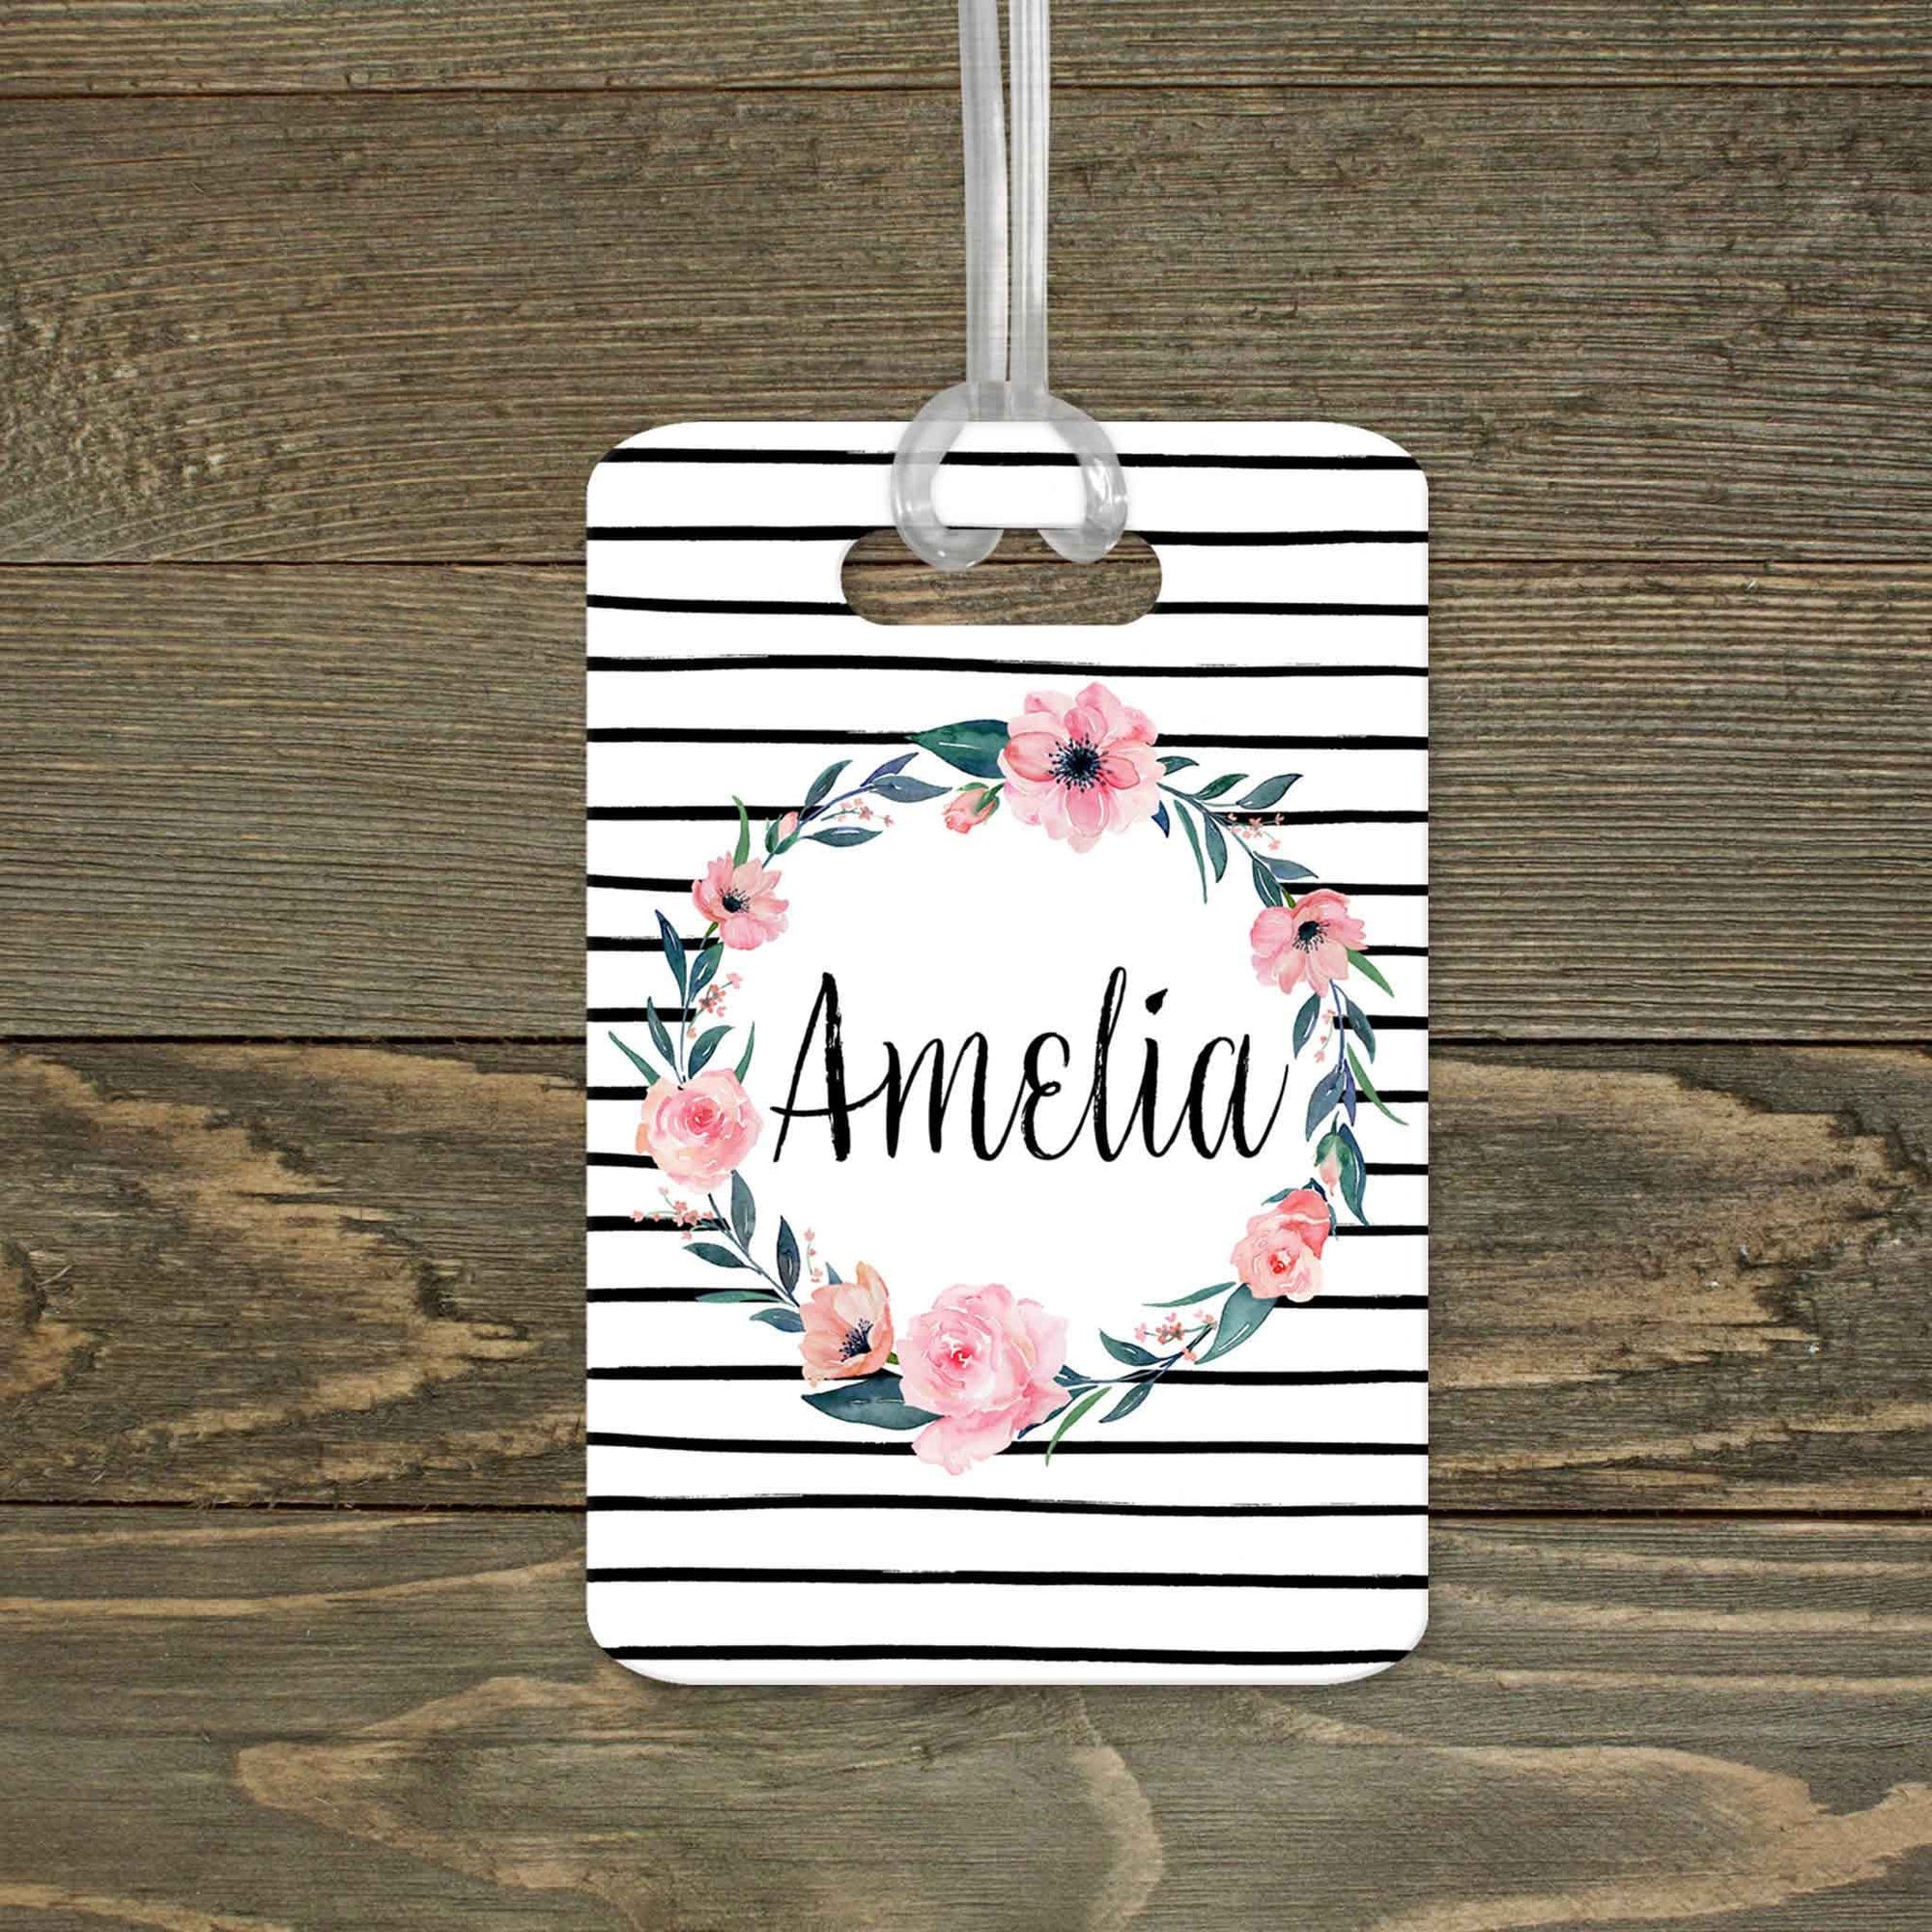 This & That Solutions - Personalized Luggage Tag | Custom Monogram Bag Tag | Black & White Stripe - Personalized Gifts & Custom Home Decor